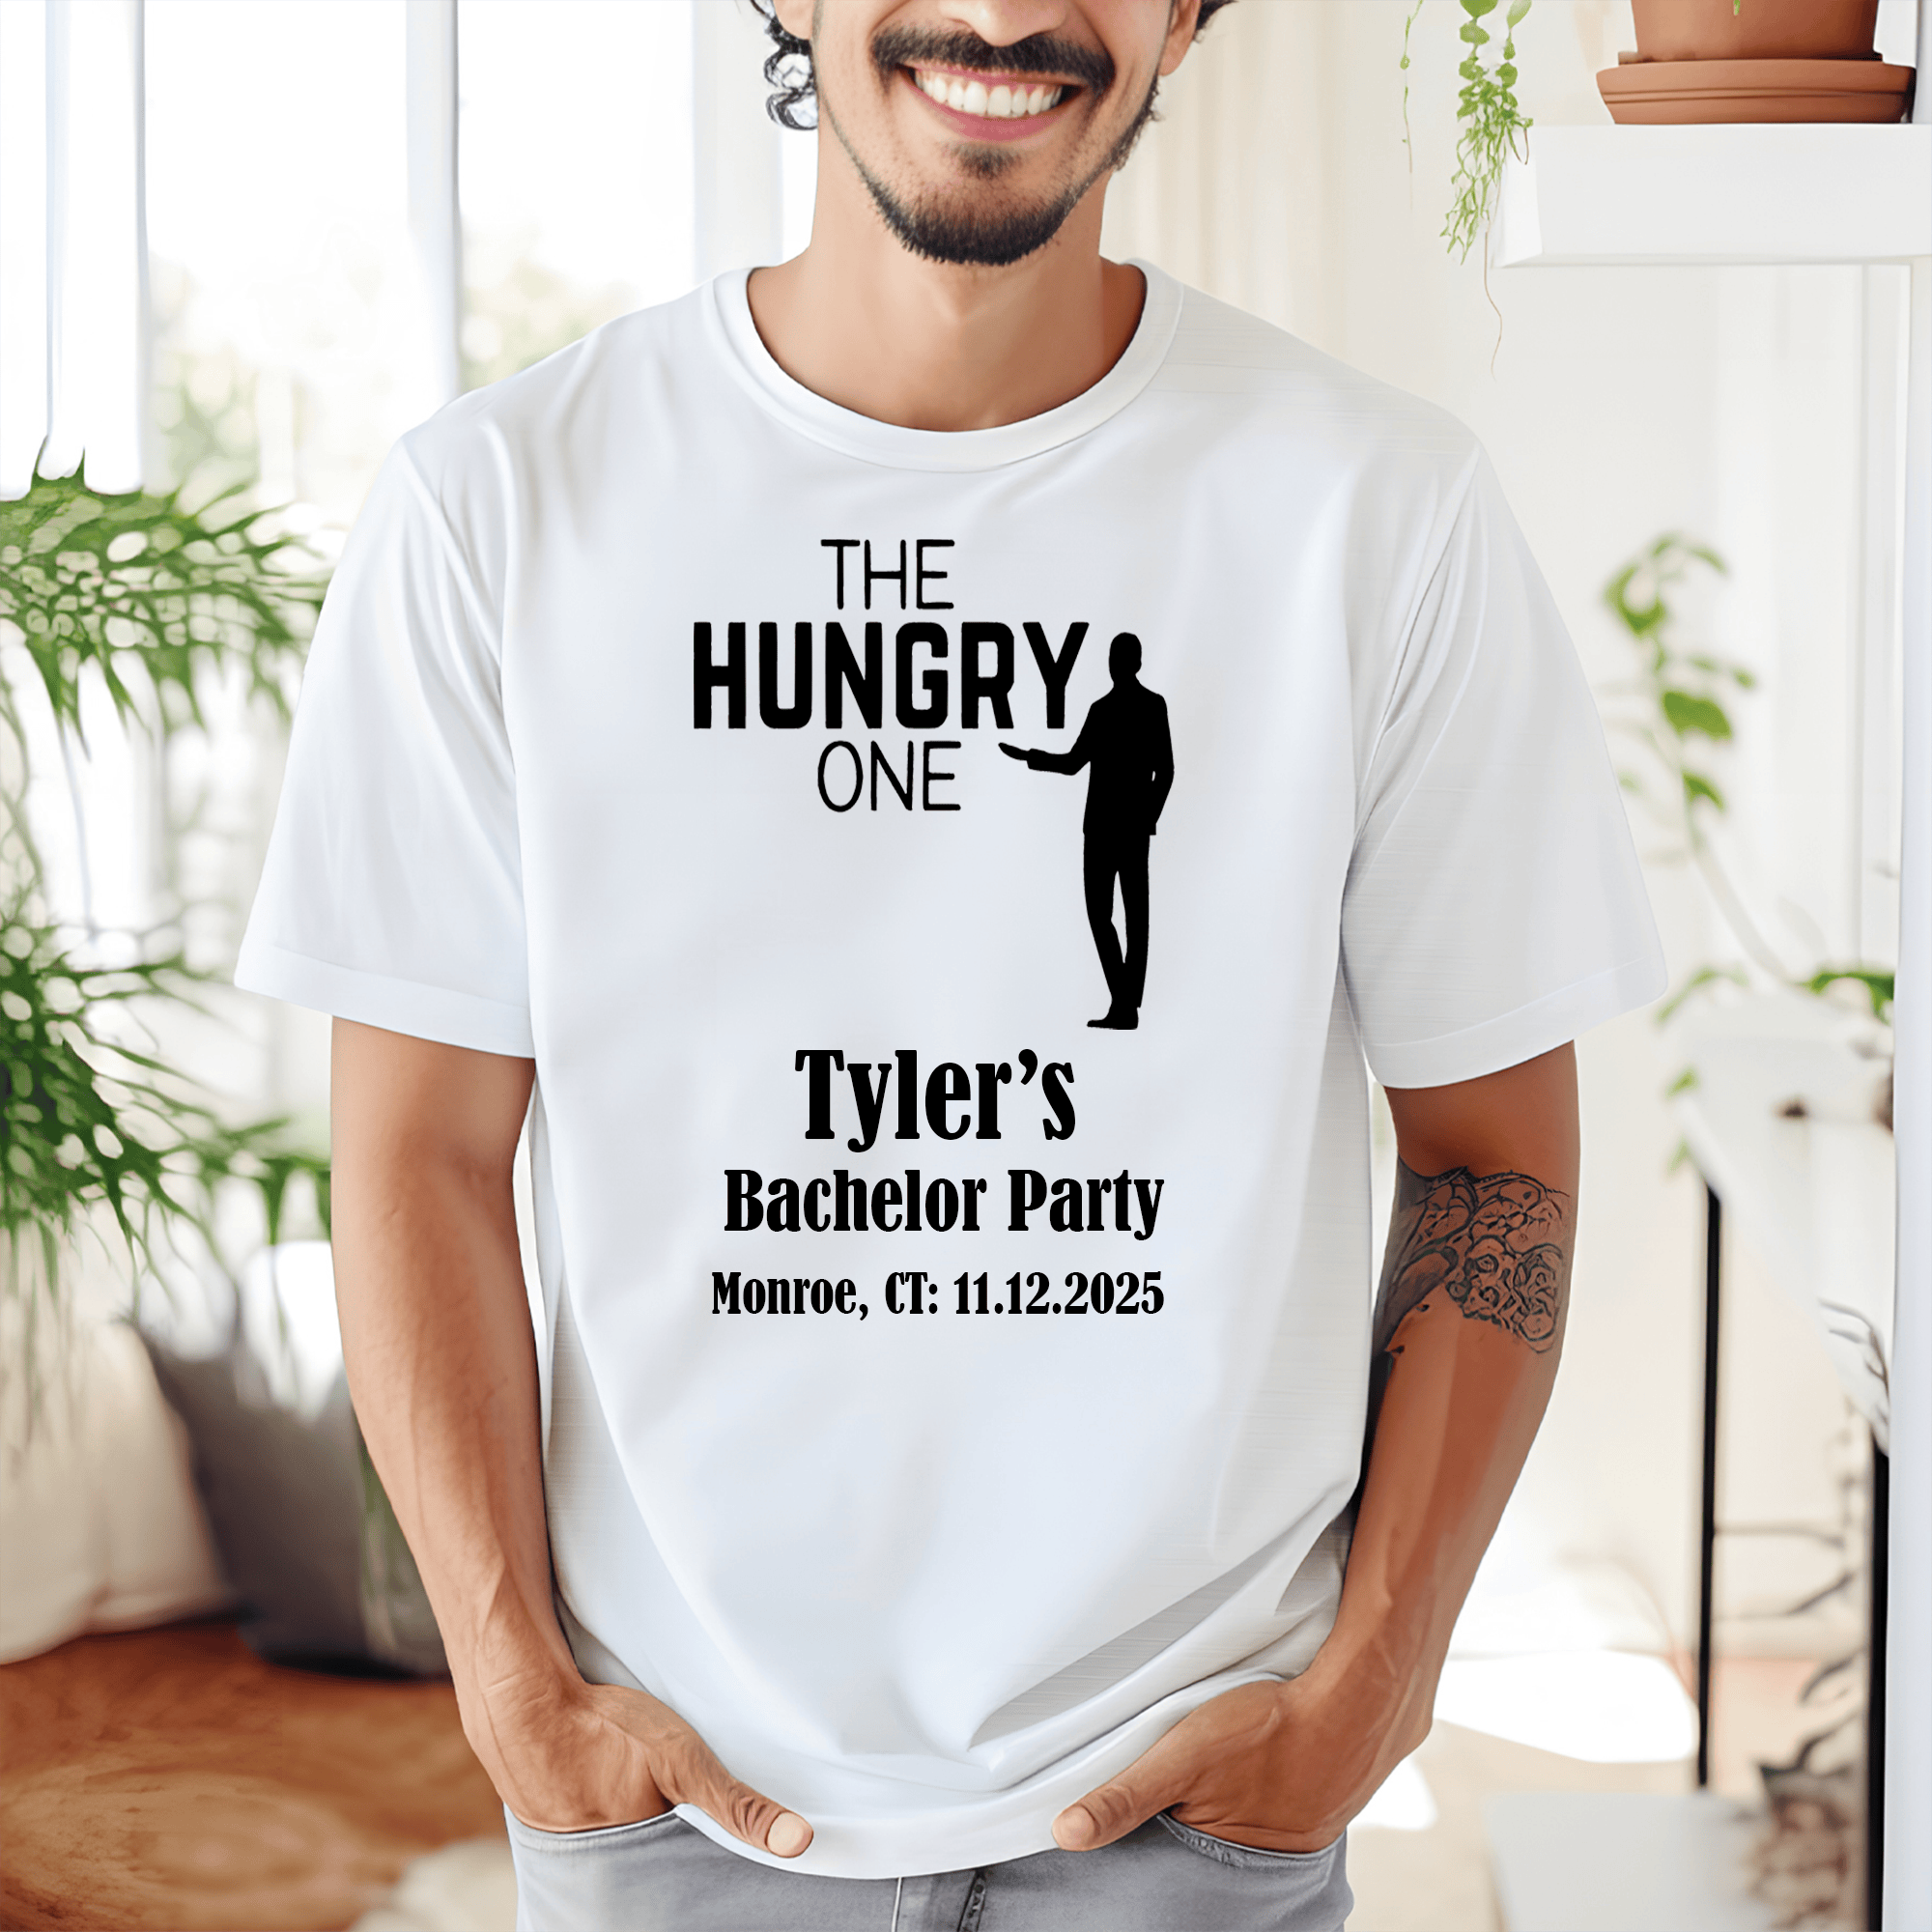 Light Blue Mens T-Shirt With The Hungry One Design